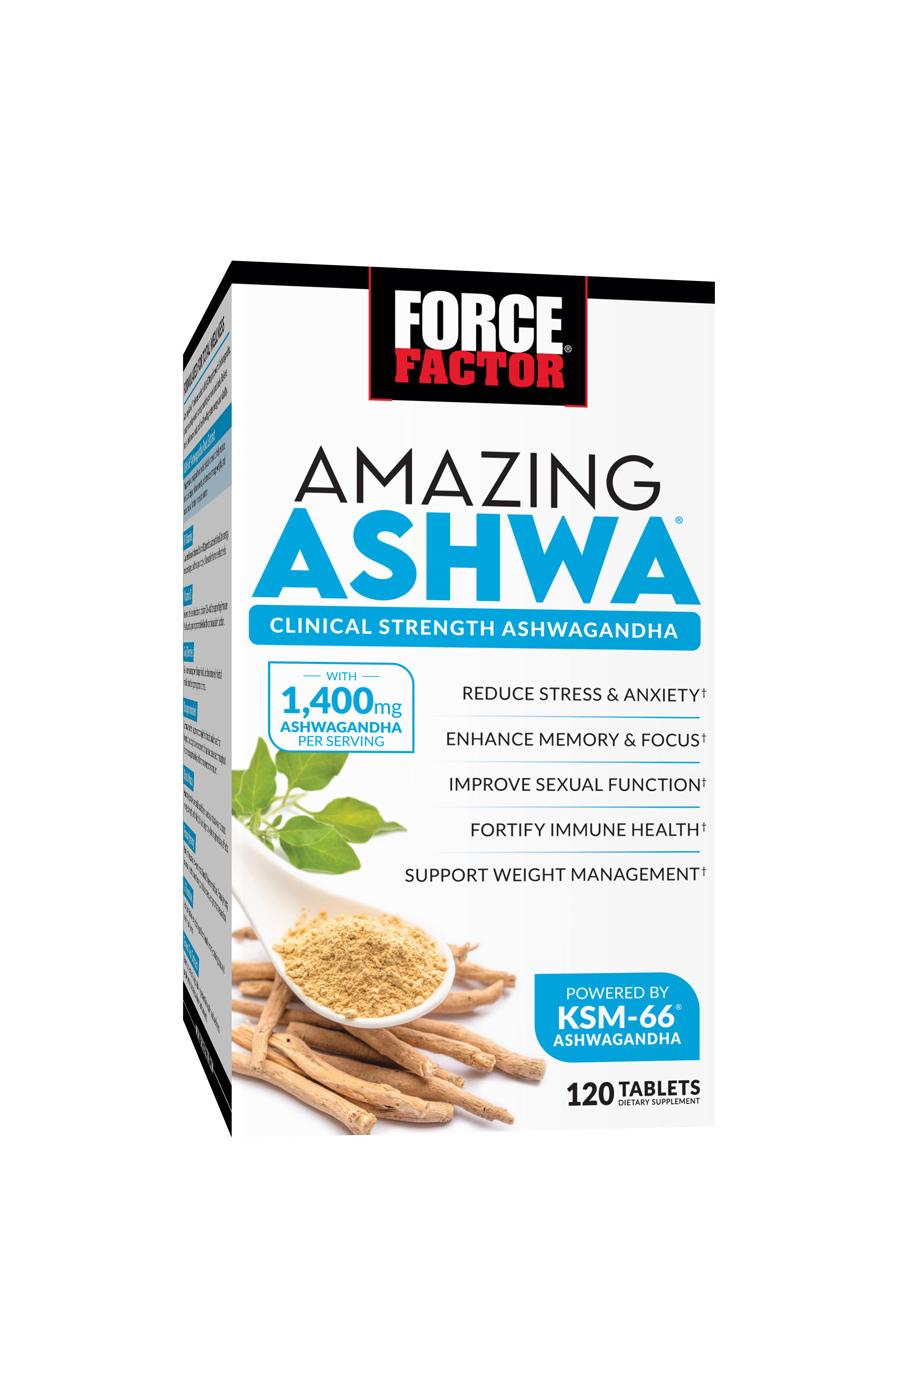 Force Factor Amazing Ashwa Tablets; image 4 of 5